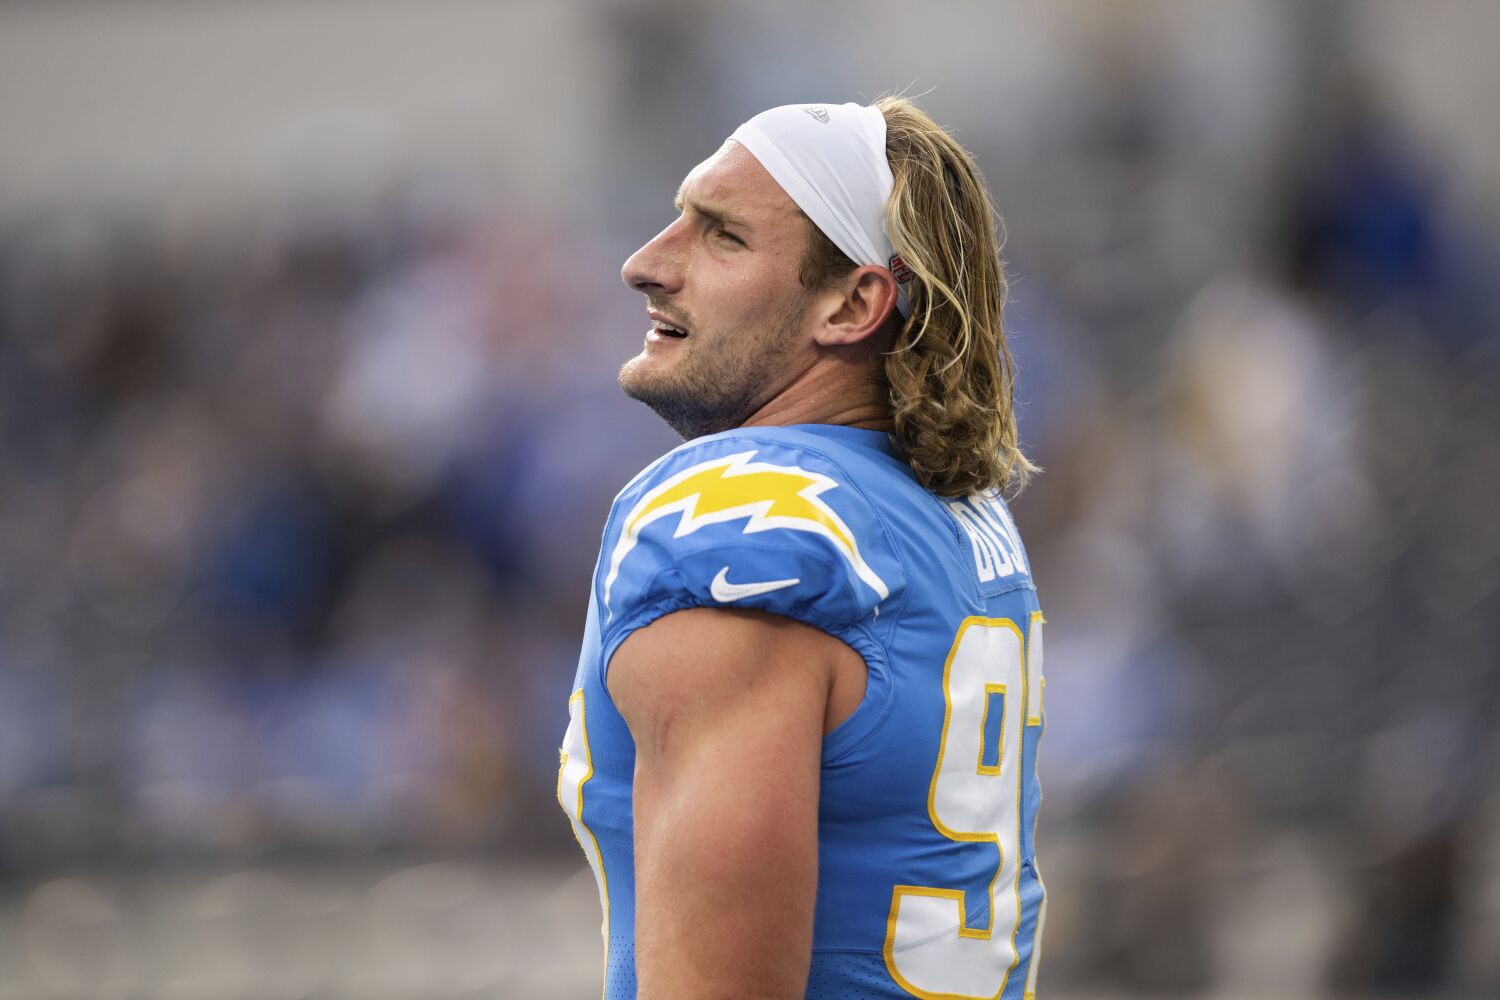 Joey Bosa and Chargers focus on the little things, not big picture, before Broncos game